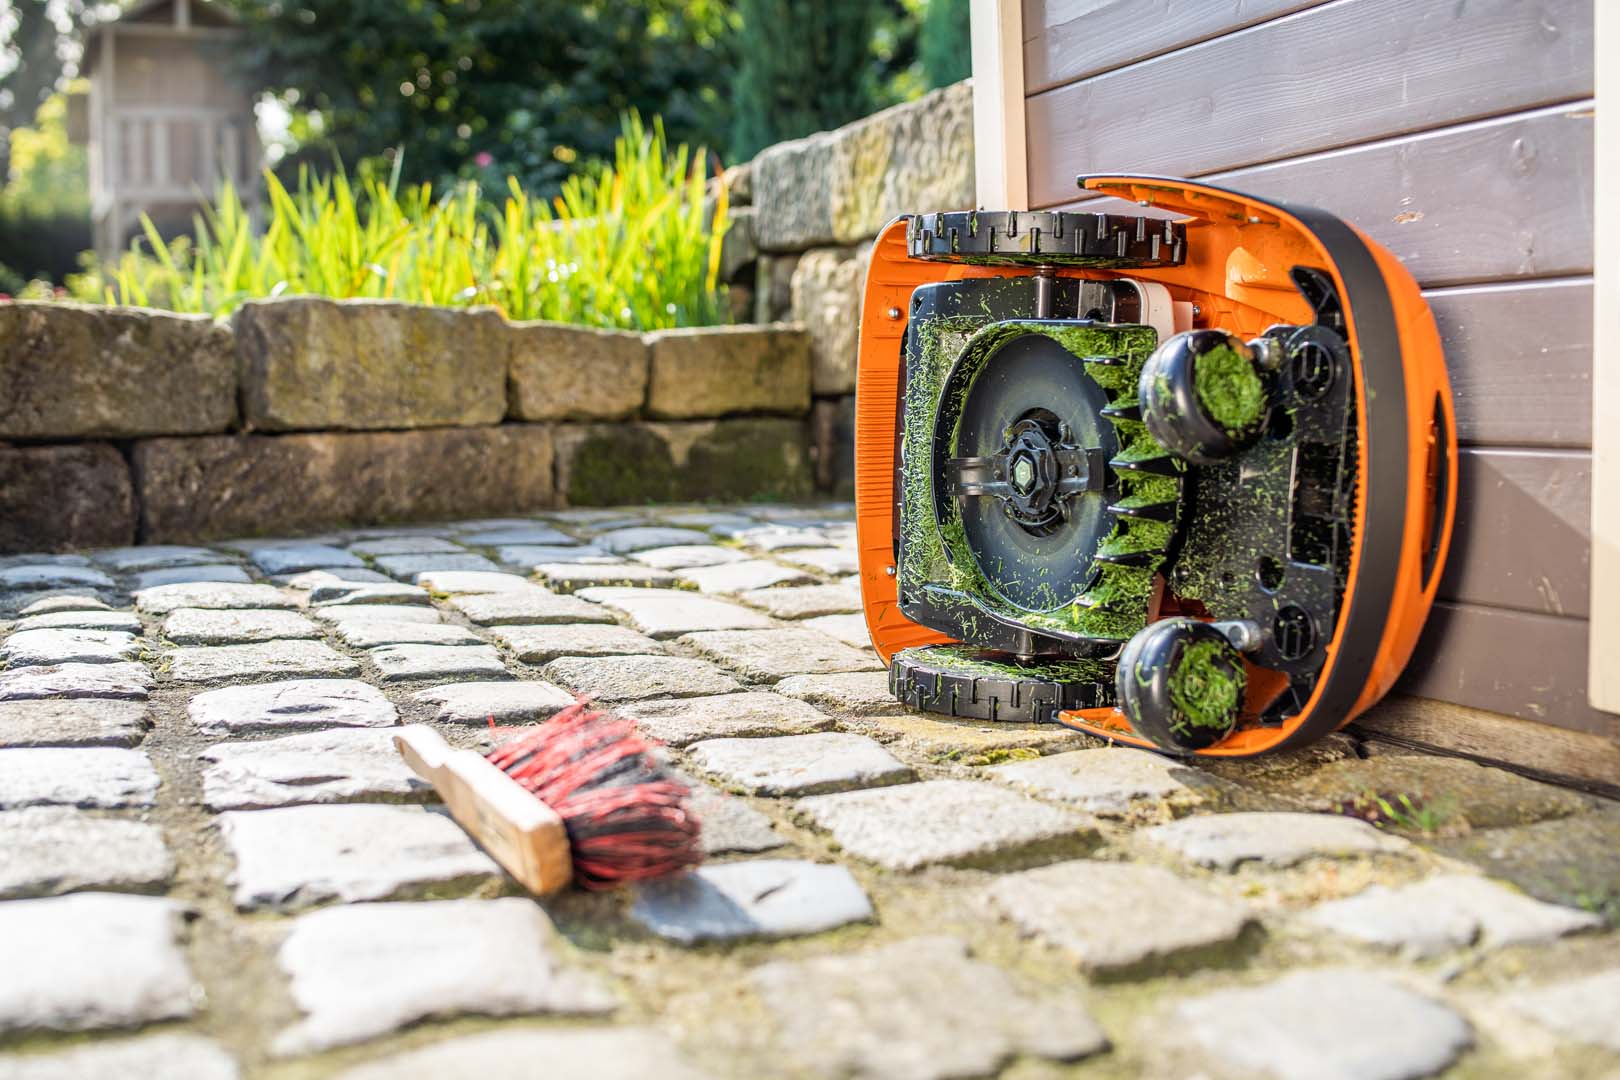 A STIHL iMOW® robot lawn mower turned on its side ready for cleaning, with a brush on the ground nearby